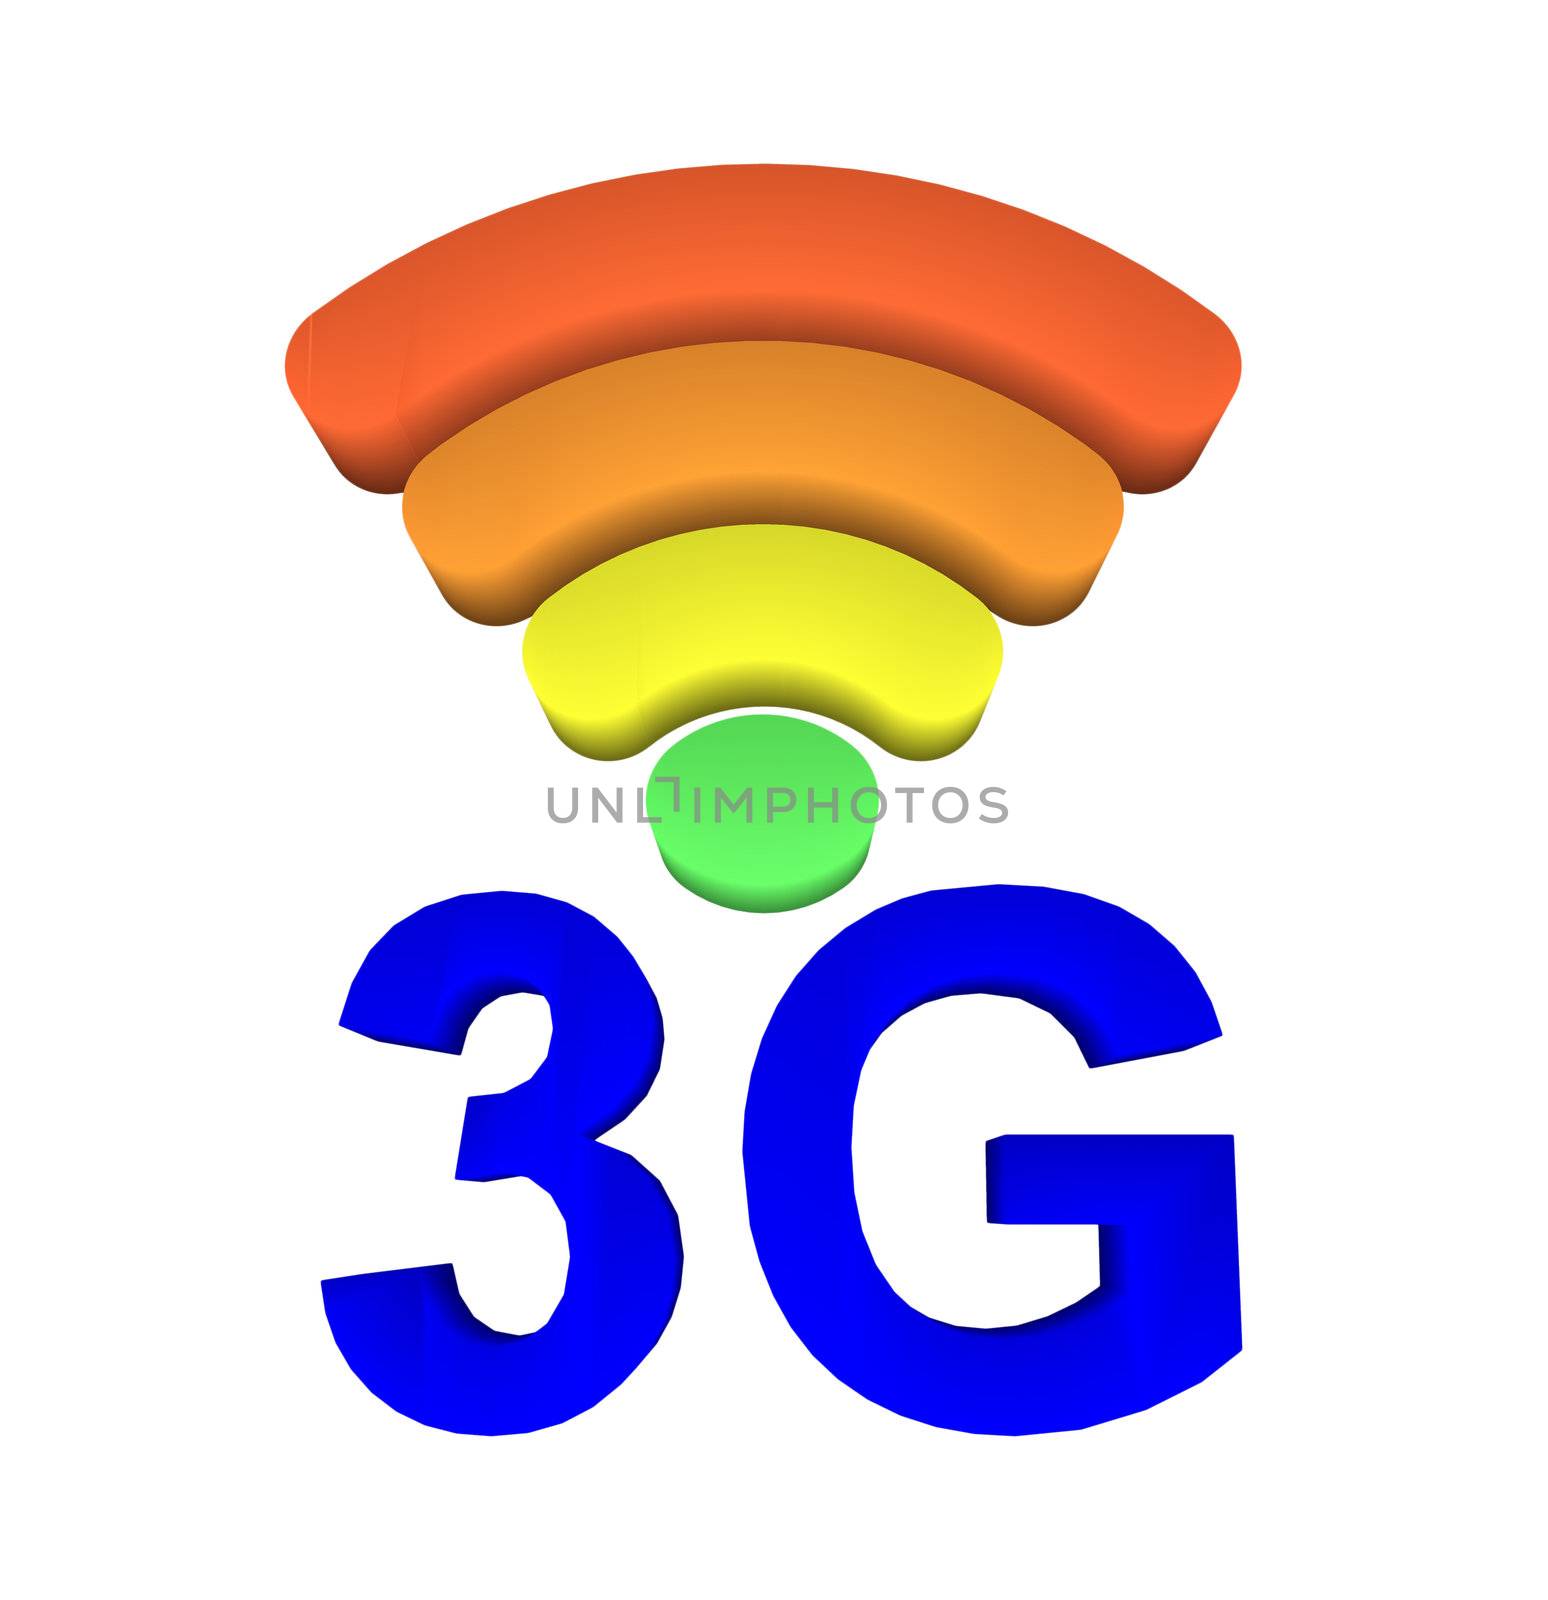 3G and signal symbol on white background